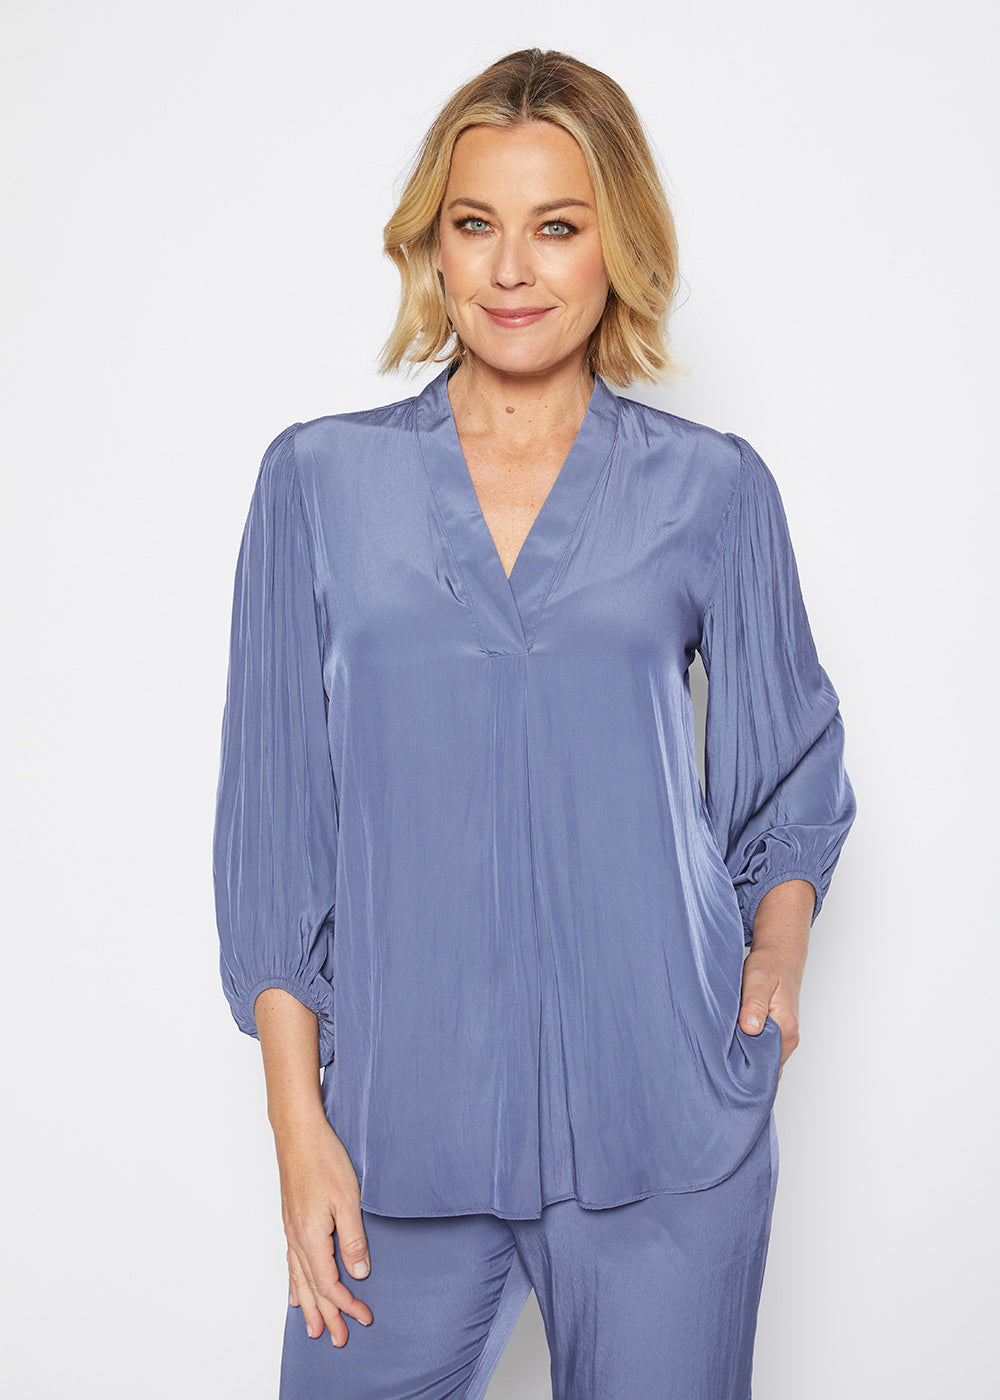 Maple Lustre billow blouse in French Blue